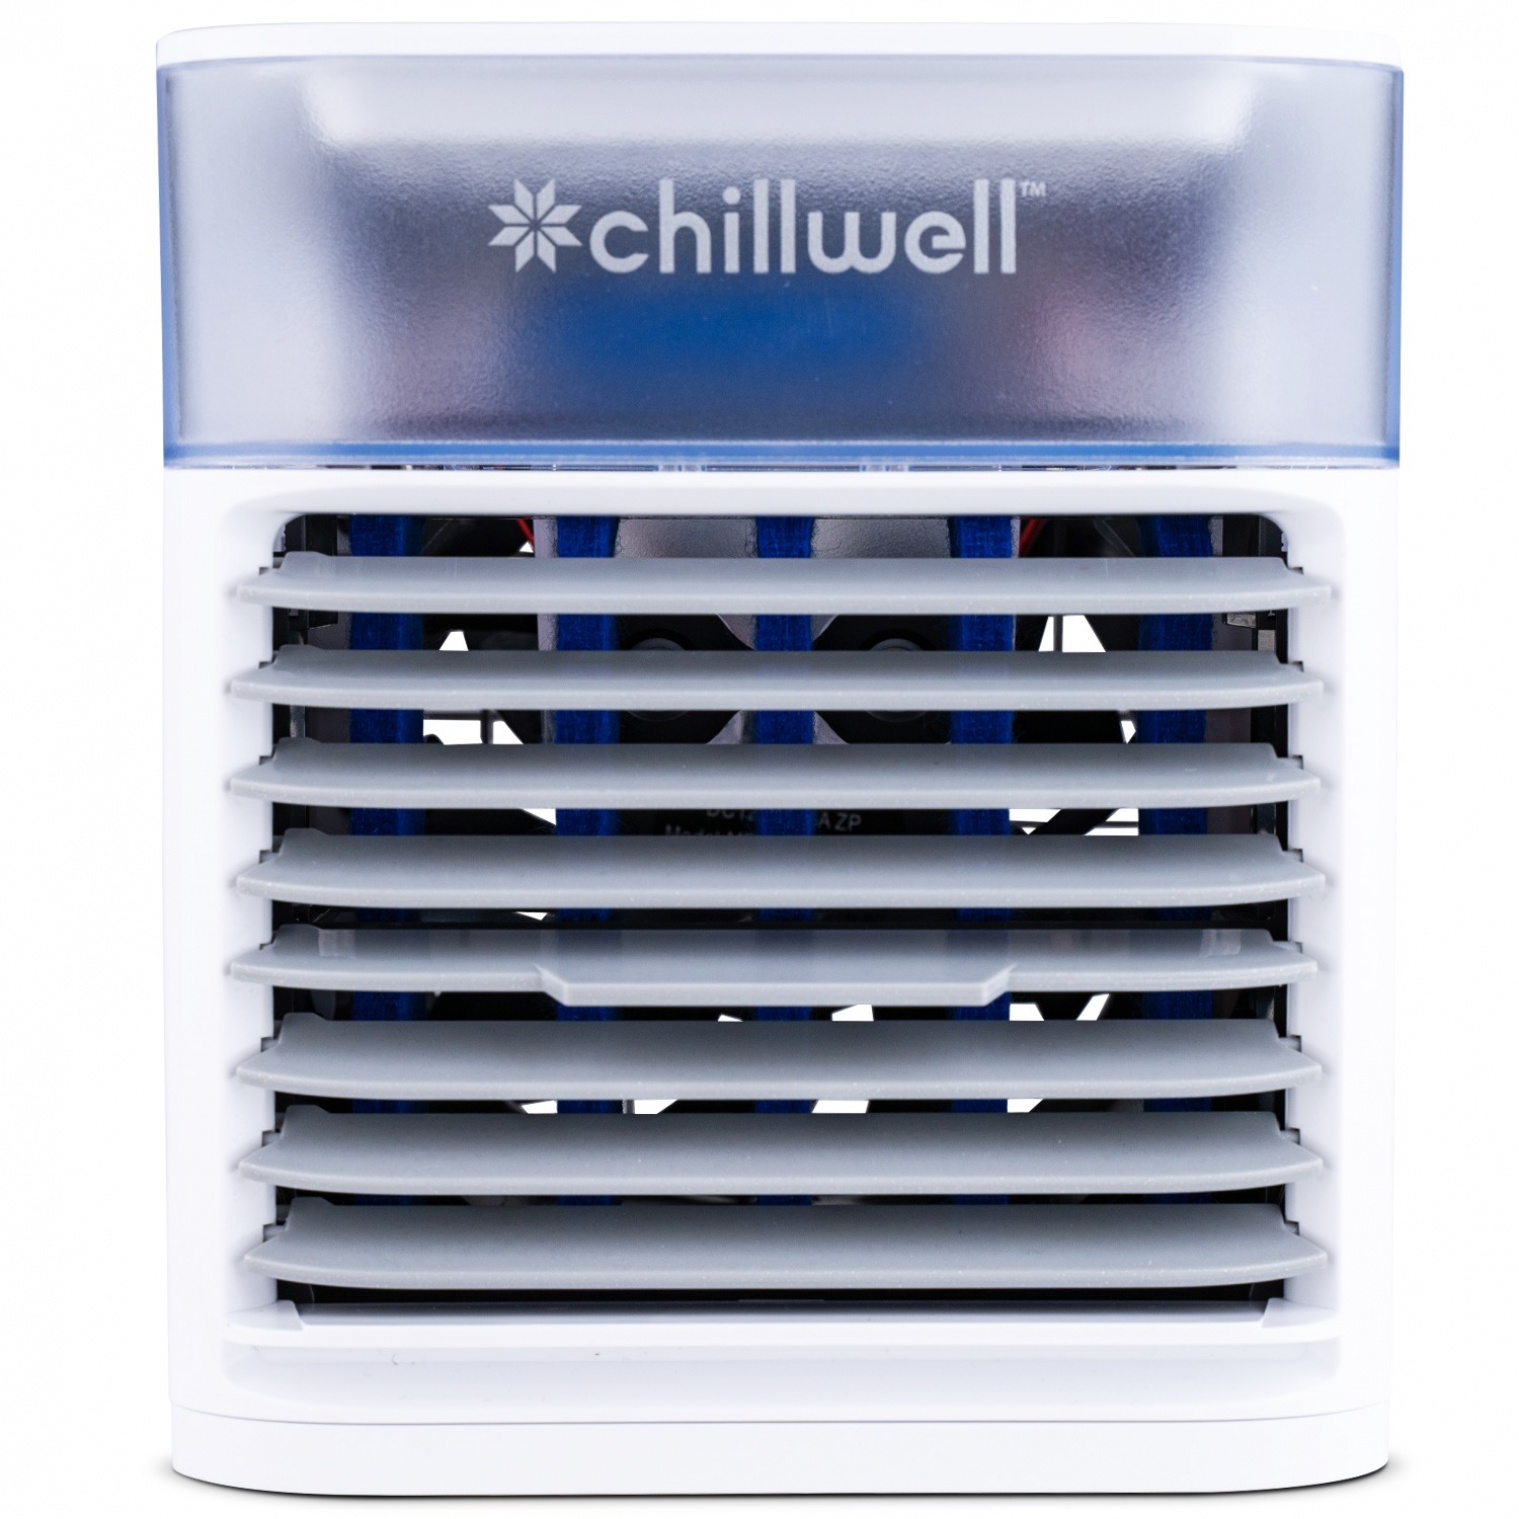 Aircon Chillwell AC